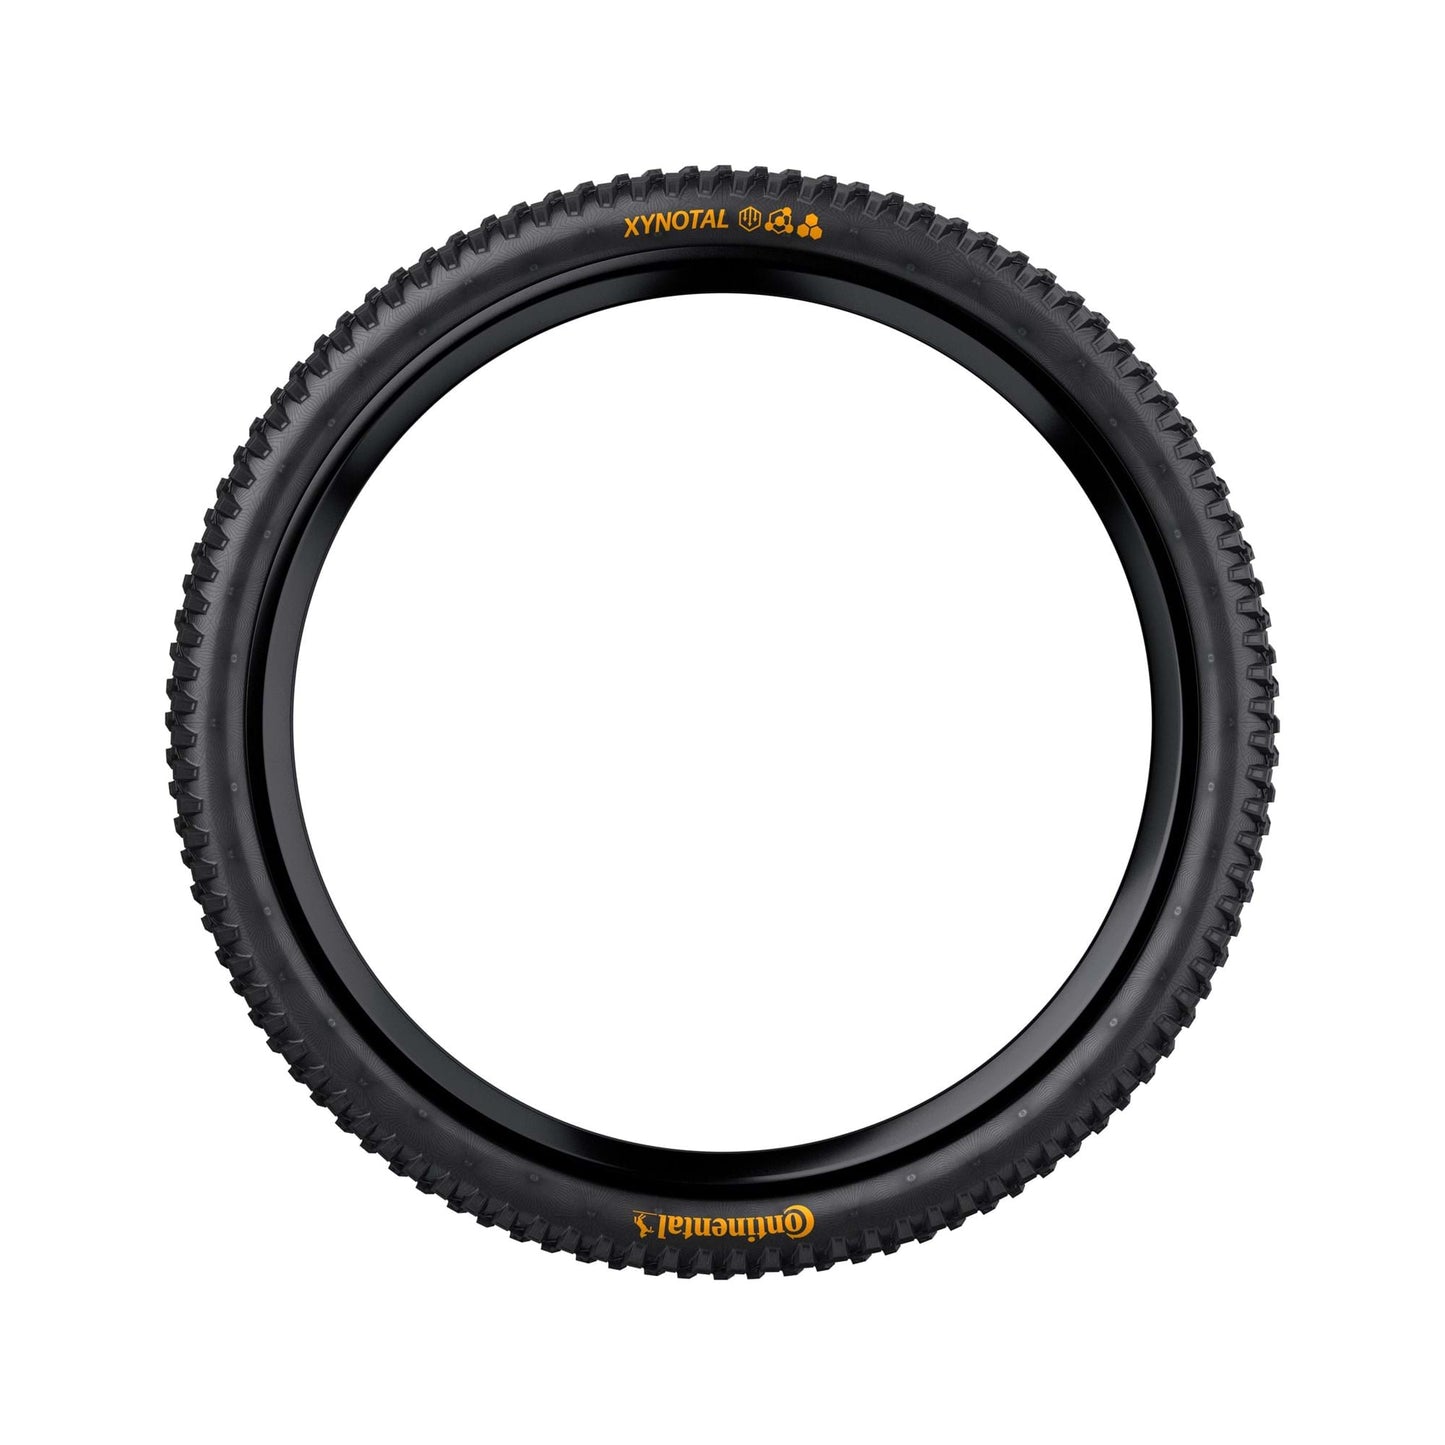 CONTINENTAL XYNOTAL DOWNHILL 27.5X2.40" SOFT FOLDING TYRE